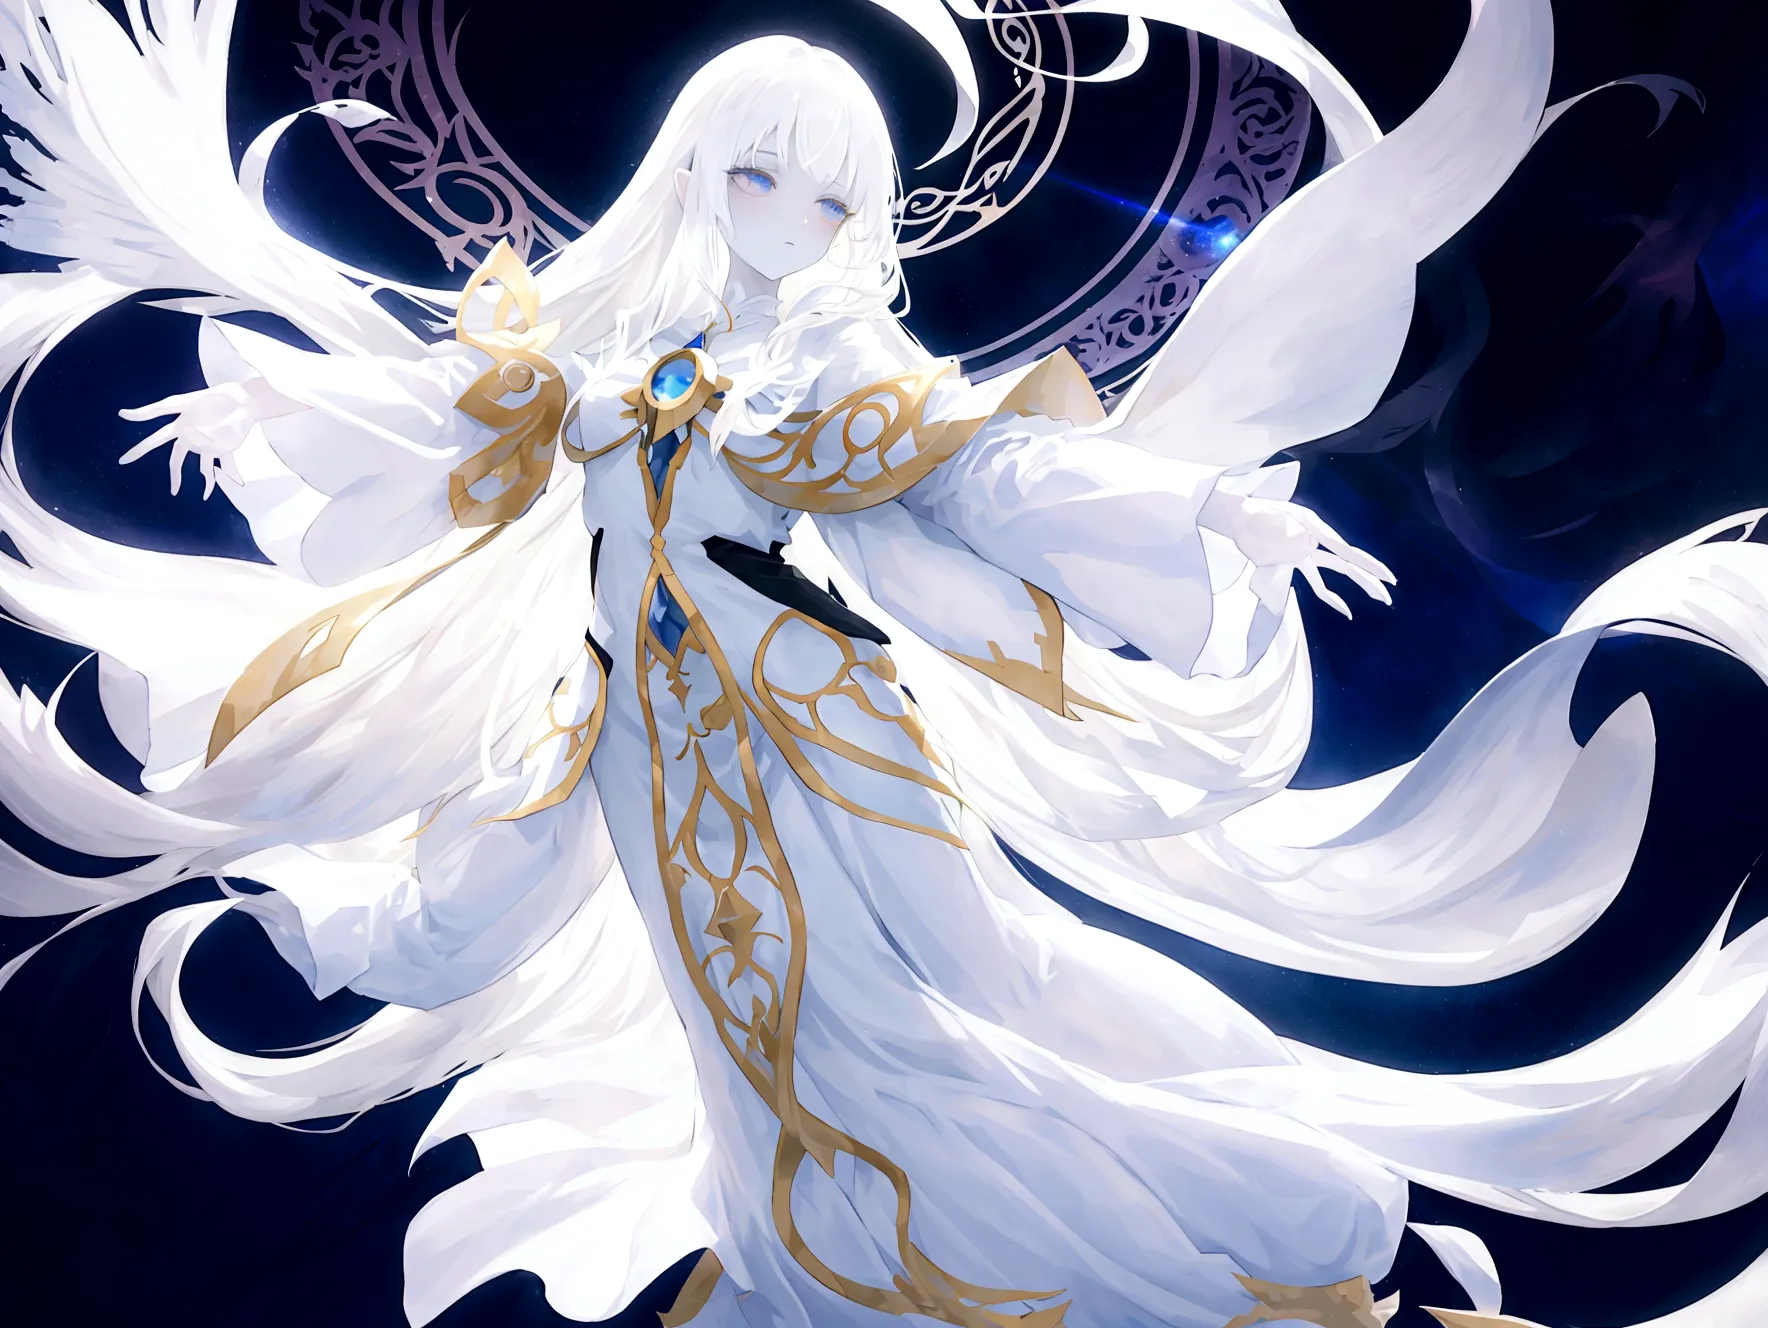 Character (hair bangs) (white long hair) (white pale skin) (mystical seer-style clothing) (character in dynamic pose) (perspecti...